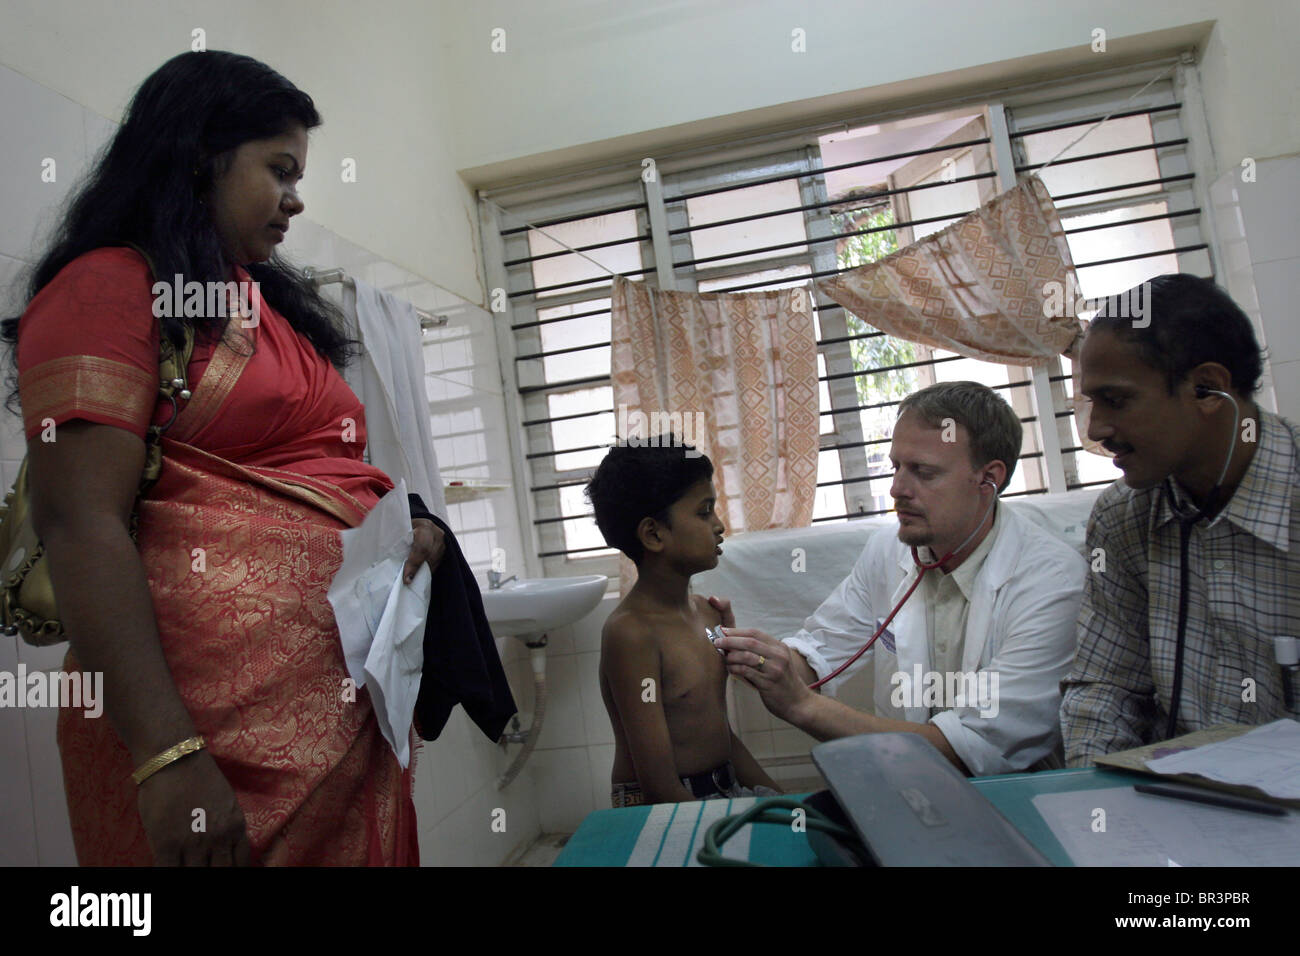 A western Swedish doctor investigates a young child patient at a hospital in Trivandrum (Thiruvananthapuram) in Kerala in India. Stock Photo